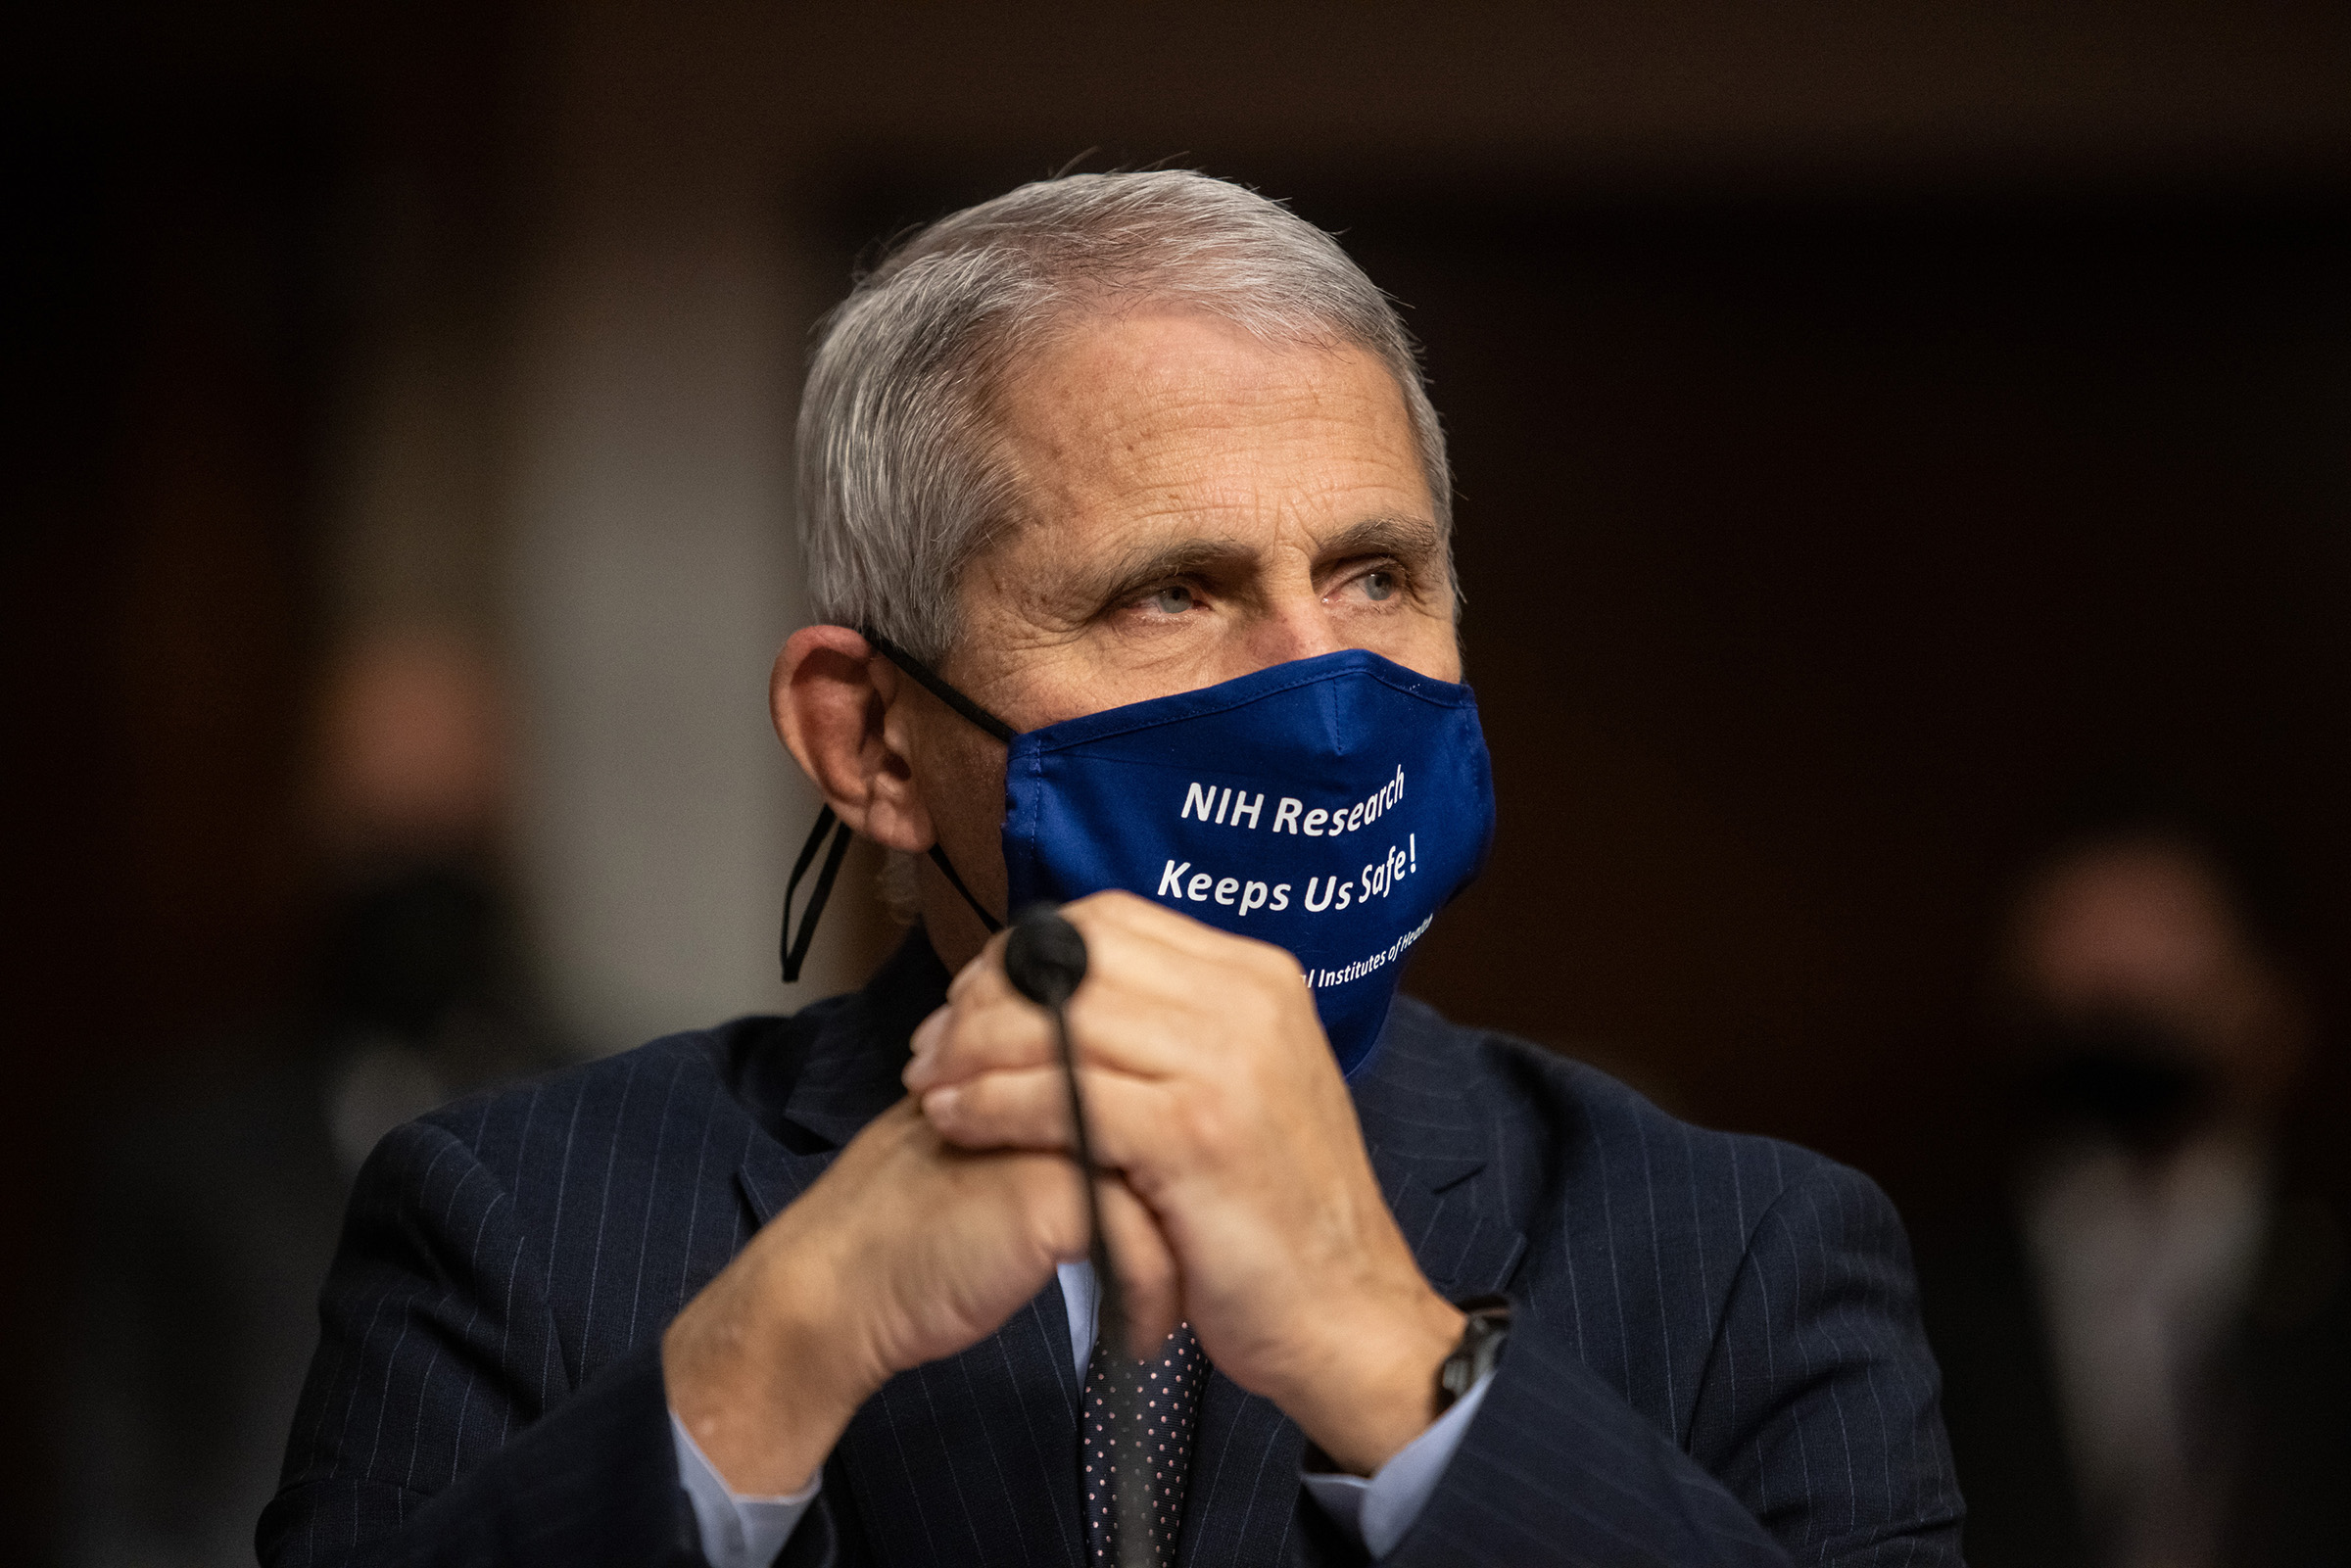 Dr. Anthony Fauci, director of the National Institute of Allergy and Infectious Diseases, attends a committee hearing in Washington DC, on September 23. 